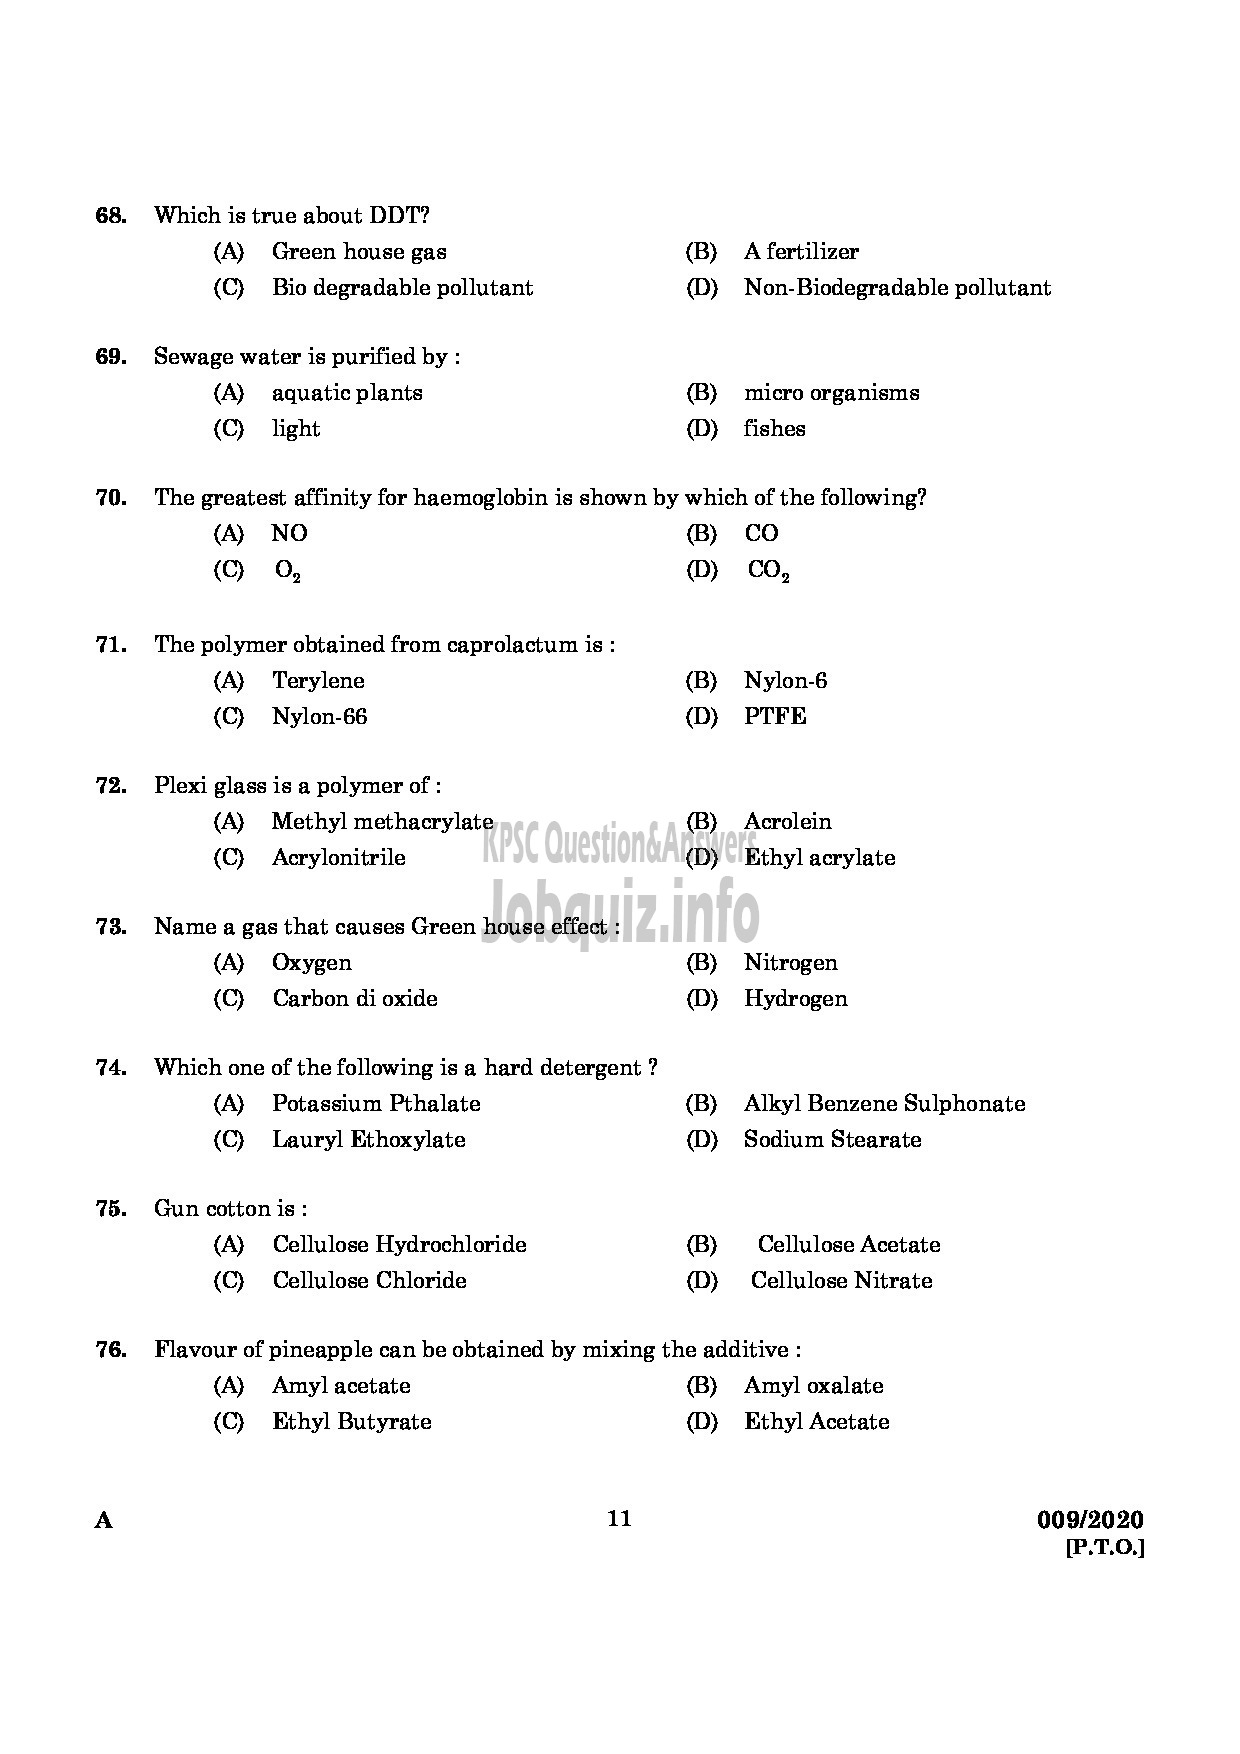 Kerala PSC Question Paper - CHEMIST IN FACTORIES AND BOILERS ENGLISH -9